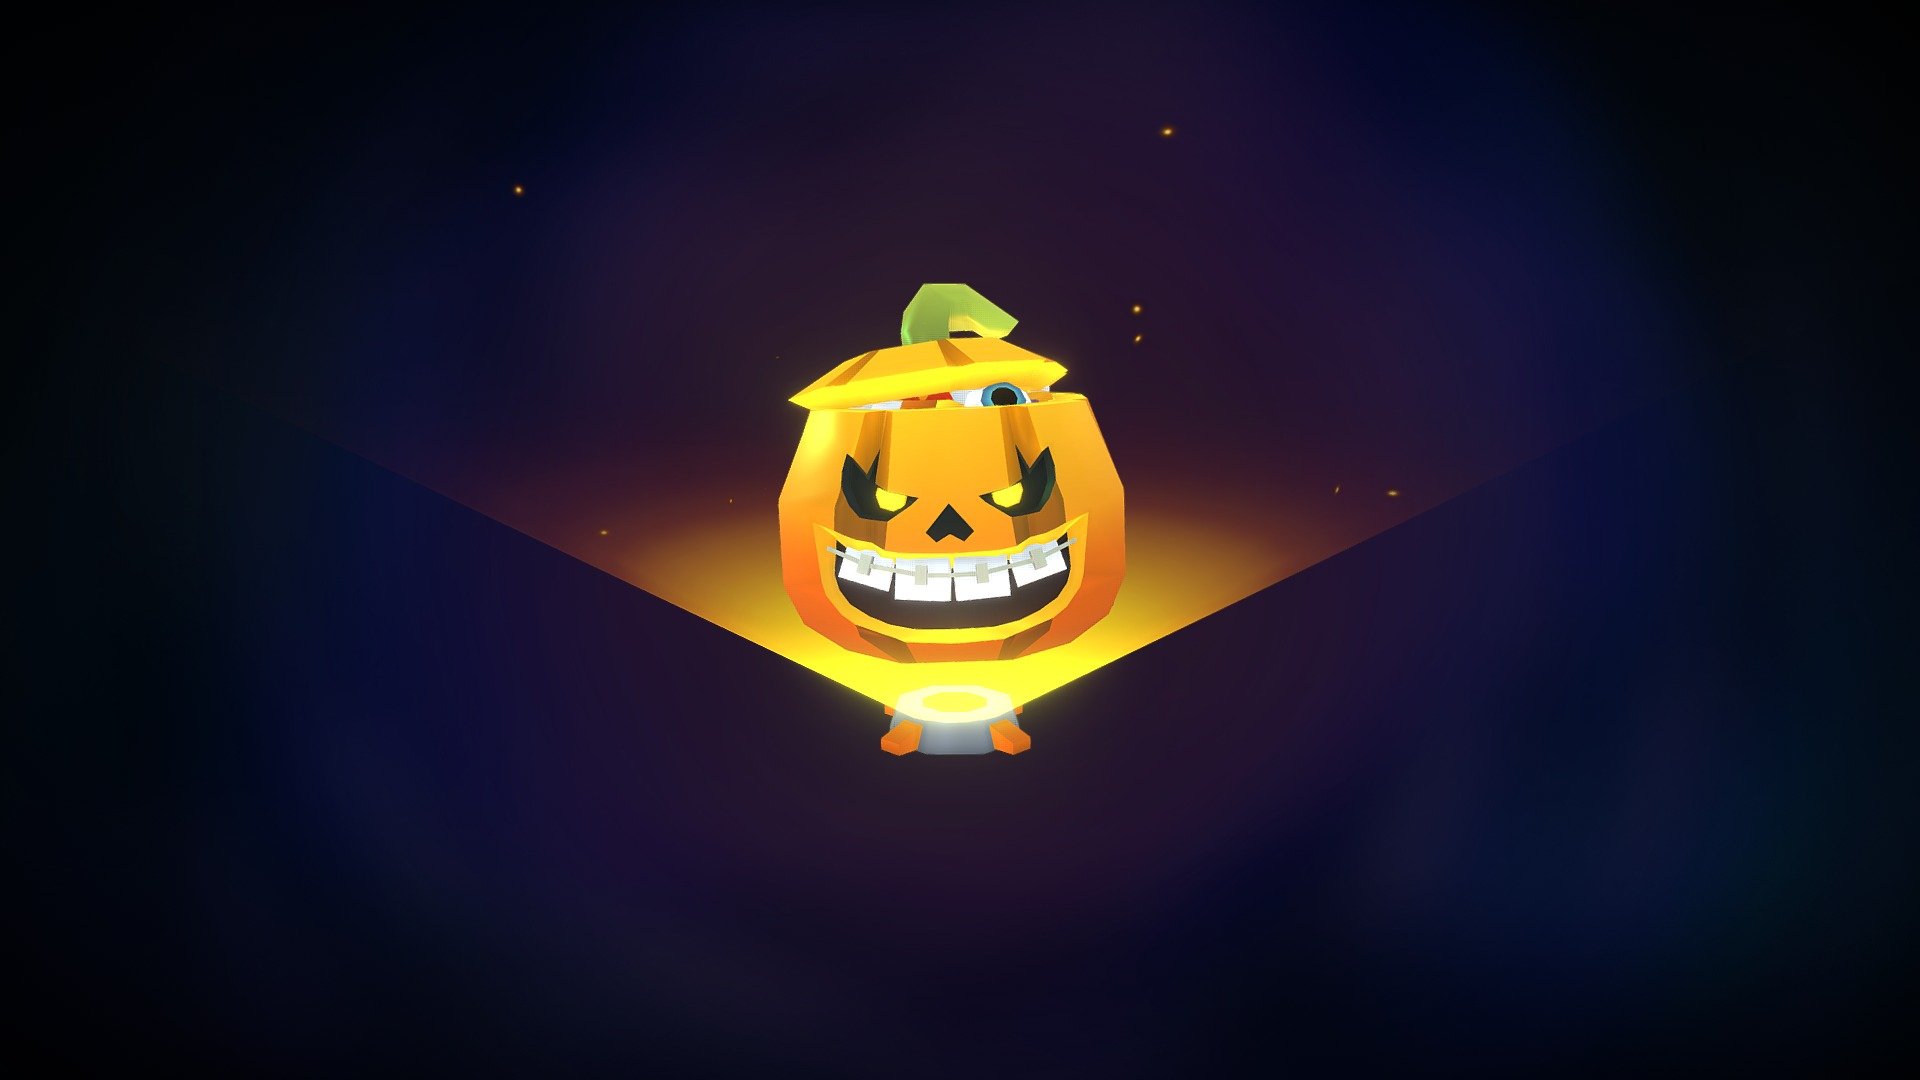 Box world Halloween loot-box. 
Stylized PBR rigged and animated (30fps) loot box for Your game

Triangle count aprox 1700k
Texture size is 1024x1024
Animations: All animations in one - Drop in - Closed state loop - Opening animation

Feel free to contact us if You need custom made loot-boxes and animations similar to this.

Our Studio LInks
Discord - Webpage - Instagram - Twitter - Youtube - Facebook - Loot Box Halloween pumpkin animated - Buy Royalty Free 3D model by Yeyo Studio (@yeyostudio) 3d model